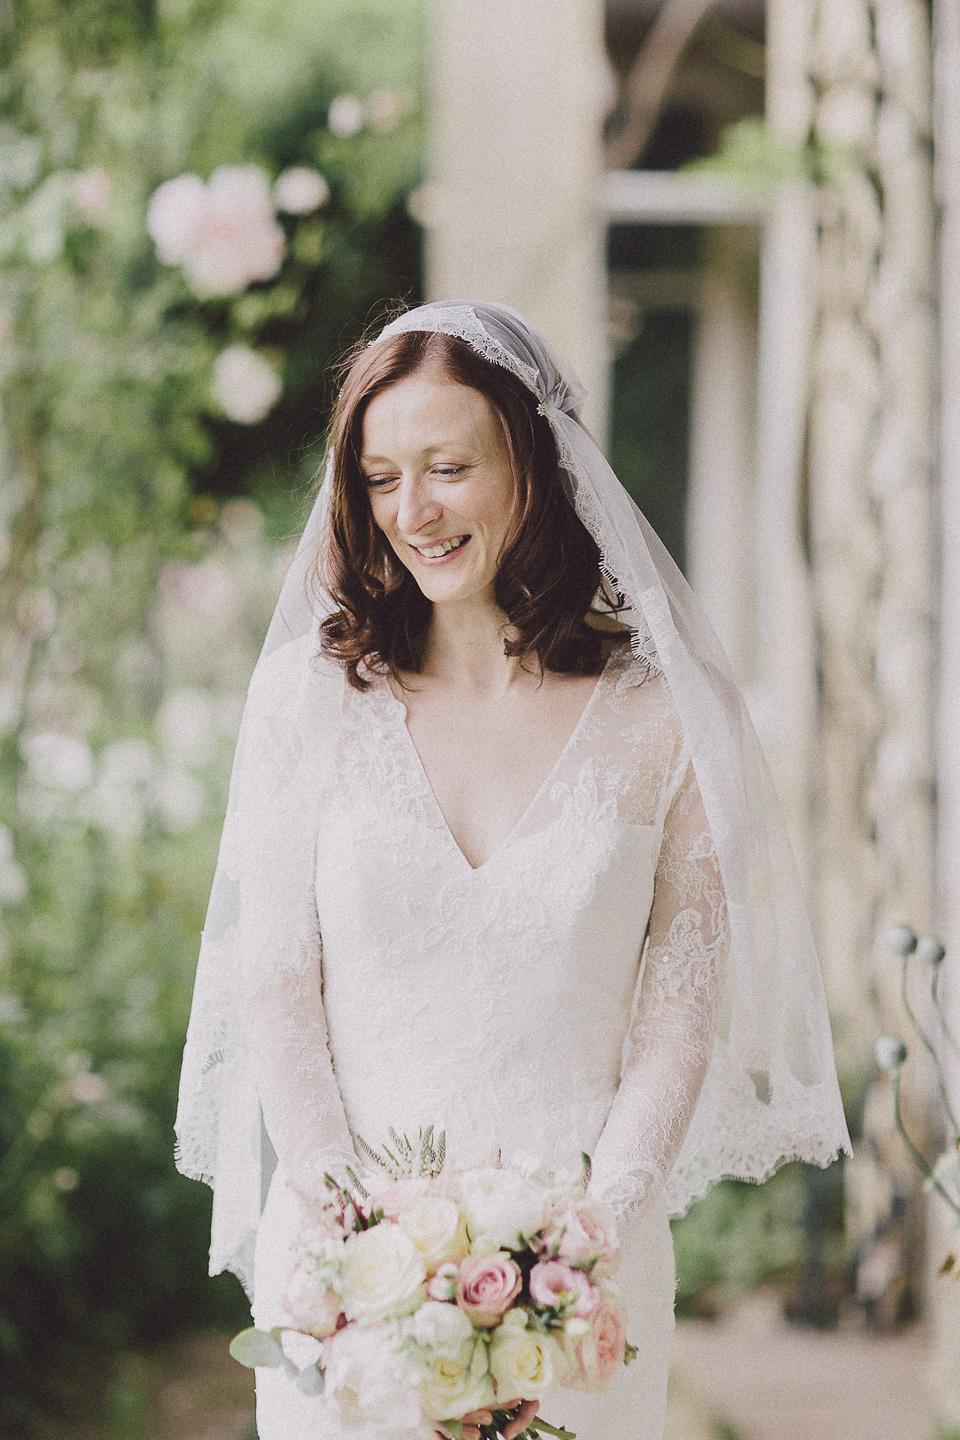 Pronovias Lace and a Juliet Cap Veil for a Japanese and 1930's Vintage Inspired Wedding. Scuffins Photography.